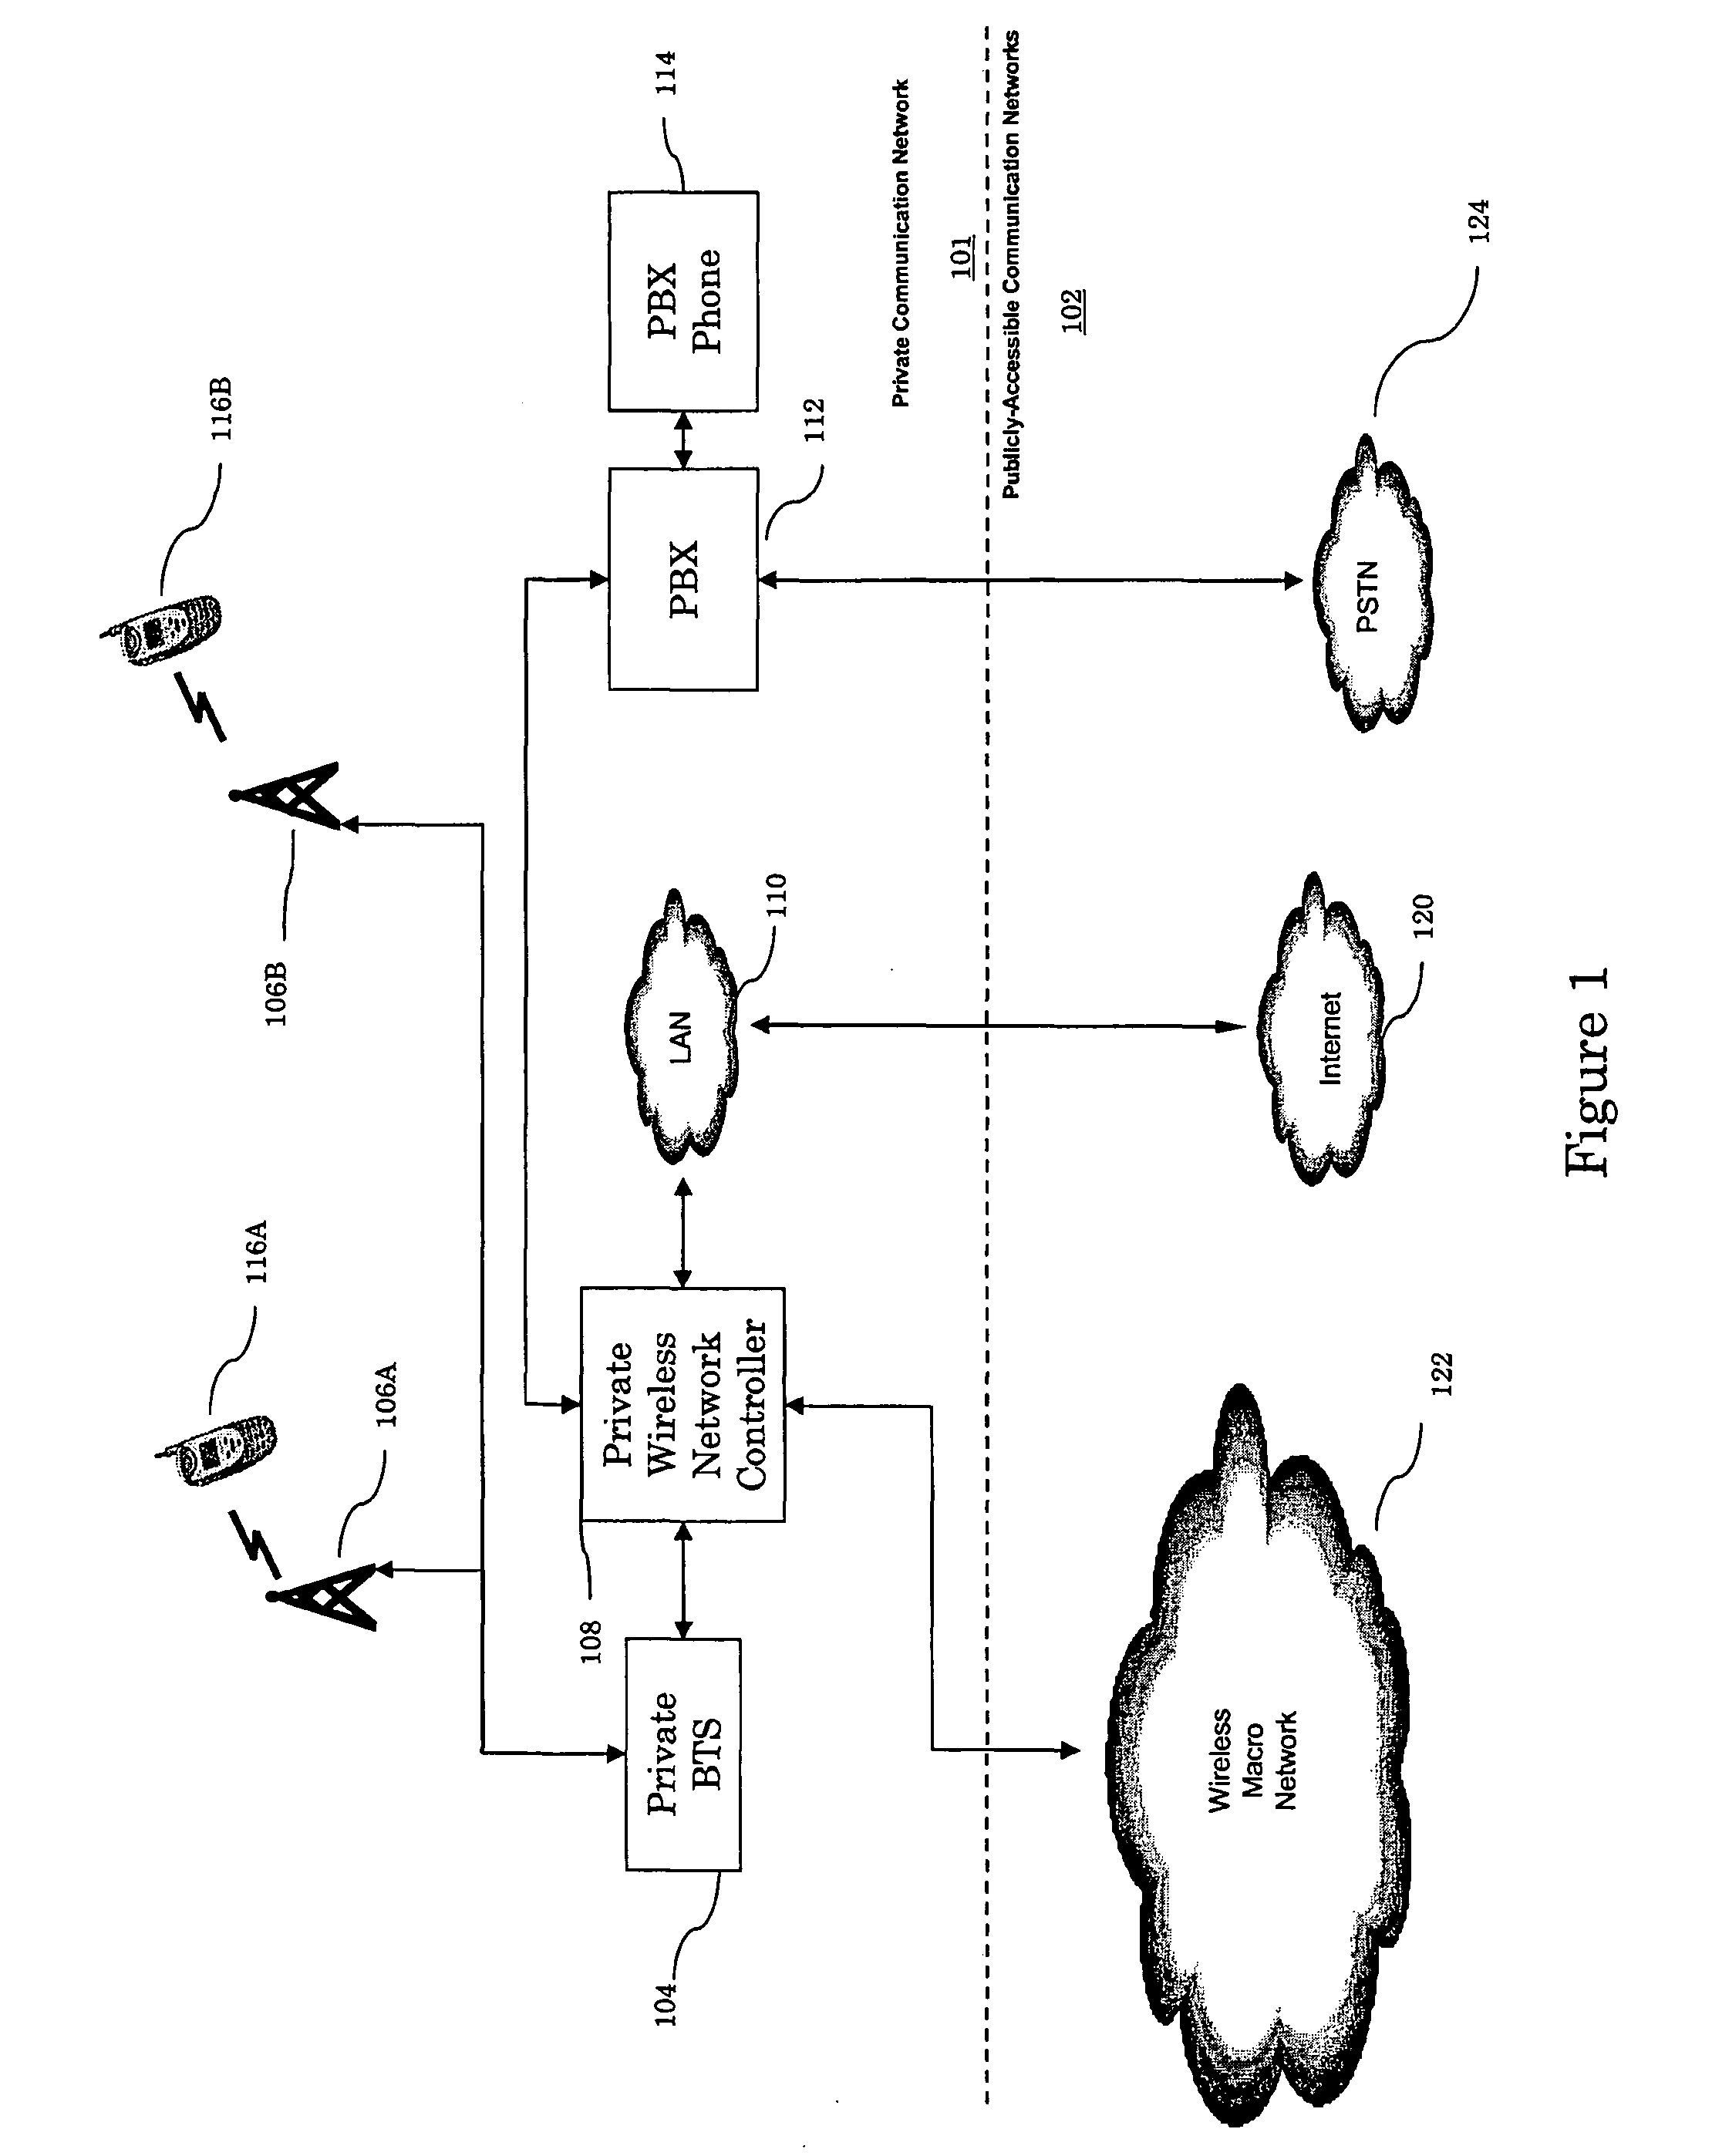 System and method for private wireless networks